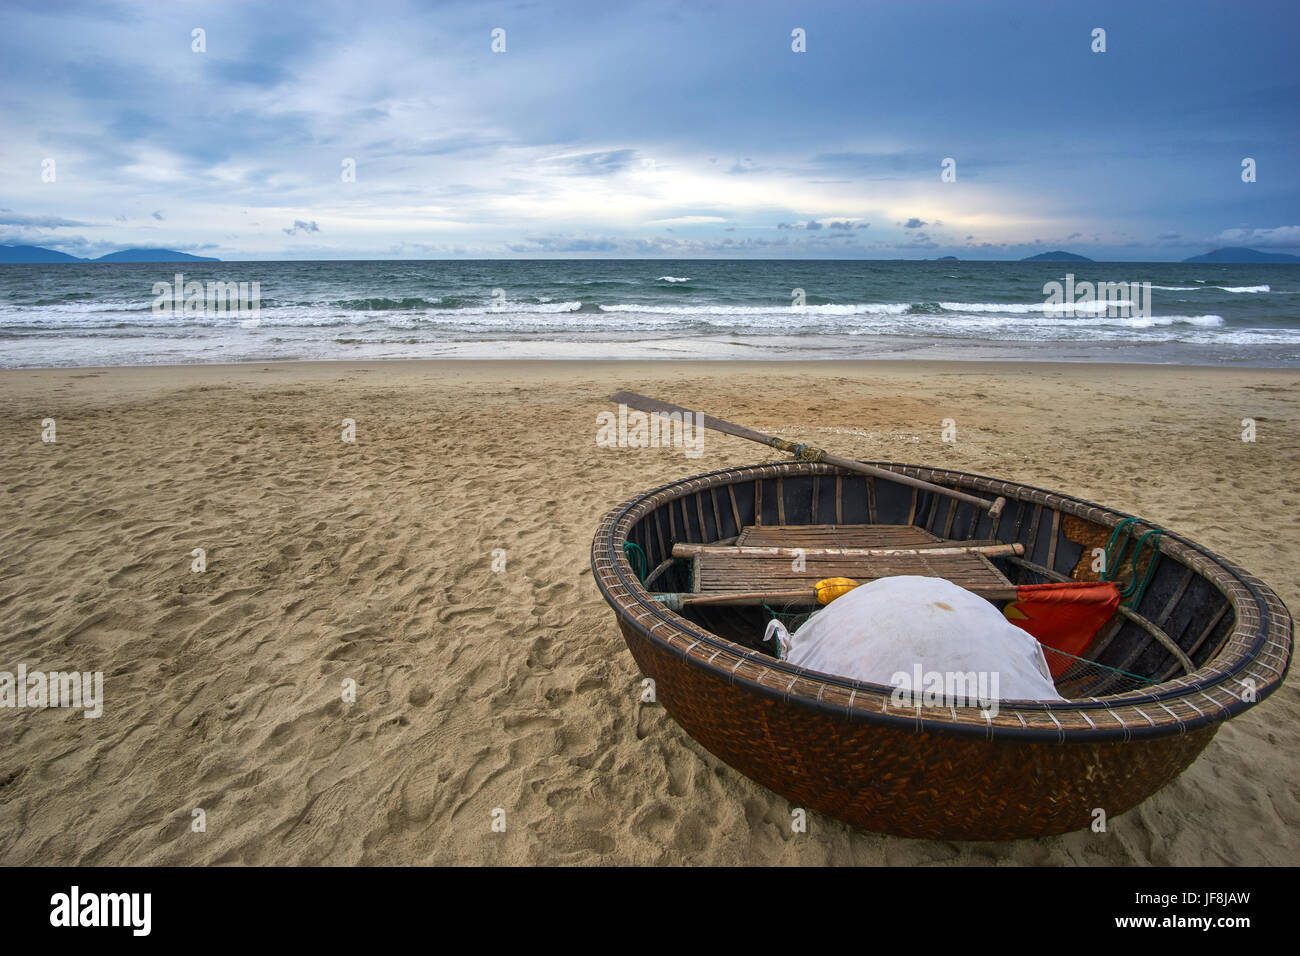 Stormy evening at the beach with dramatic clouds and waves. Traditional vietnamese coconut boat in the foreground. Hoi an, An Bang beach. Stock Photo